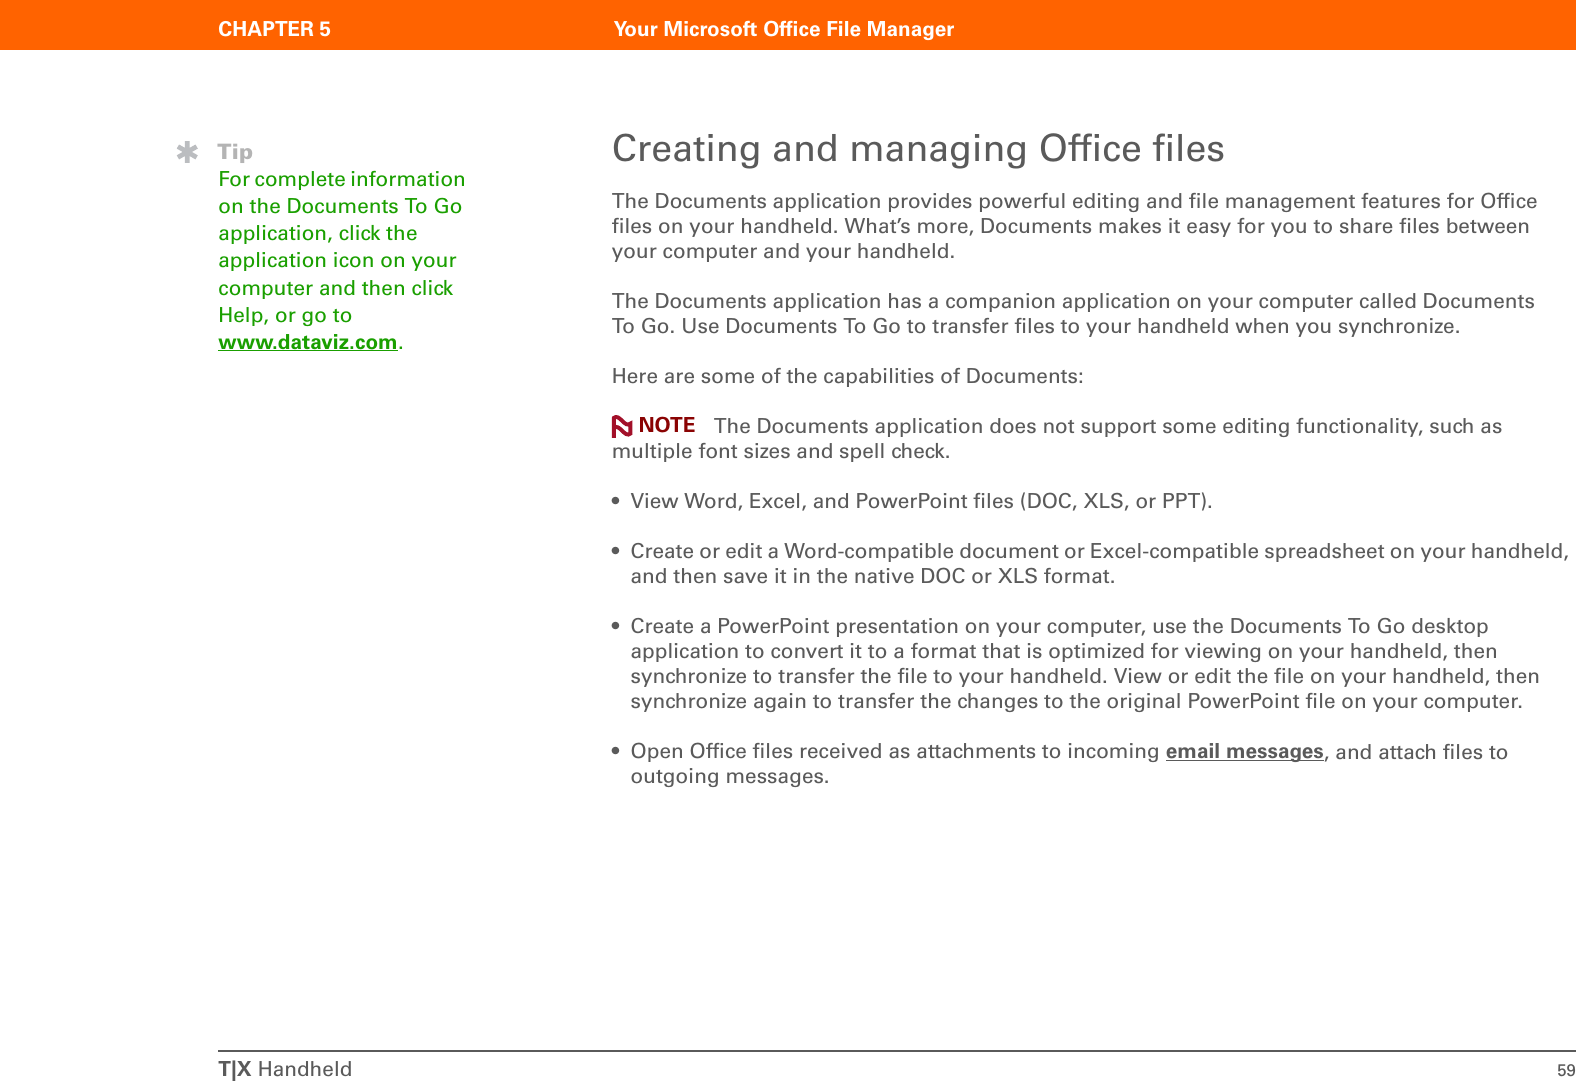 CHAPTER 5 Your Microsoft Office File ManagerT|X Handheld 59Creating and managing Office filesThe Documents application provides powerful editing and file management features for Office files on your handheld. What’s more, Documents makes it easy for you to share files between your computer and your handheld. The Documents application has a companion application on your computer called Documents To Go. Use Documents To Go to transfer files to your handheld when you synchronize.Here are some of the capabilities of Documents: The Documents application does not support some editing functionality, such as multiple font sizes and spell check.• View Word, Excel, and PowerPoint files (DOC, XLS, or PPT).• Create or edit a Word-compatible document or Excel-compatible spreadsheet on your handheld, and then save it in the native DOC or XLS format. • Create a PowerPoint presentation on your computer, use the Documents To Go desktop application to convert it to a format that is optimized for viewing on your handheld, then synchronize to transfer the file to your handheld. View or edit the file on your handheld, then synchronize again to transfer the changes to the original PowerPoint file on your computer.• Open Office files received as attachments to incoming email messages, and attach files to outgoing messages.TipFor complete information on the Documents To Go application, click the application icon on your computer and then click Help, or go to www.dataviz.com.NOTE